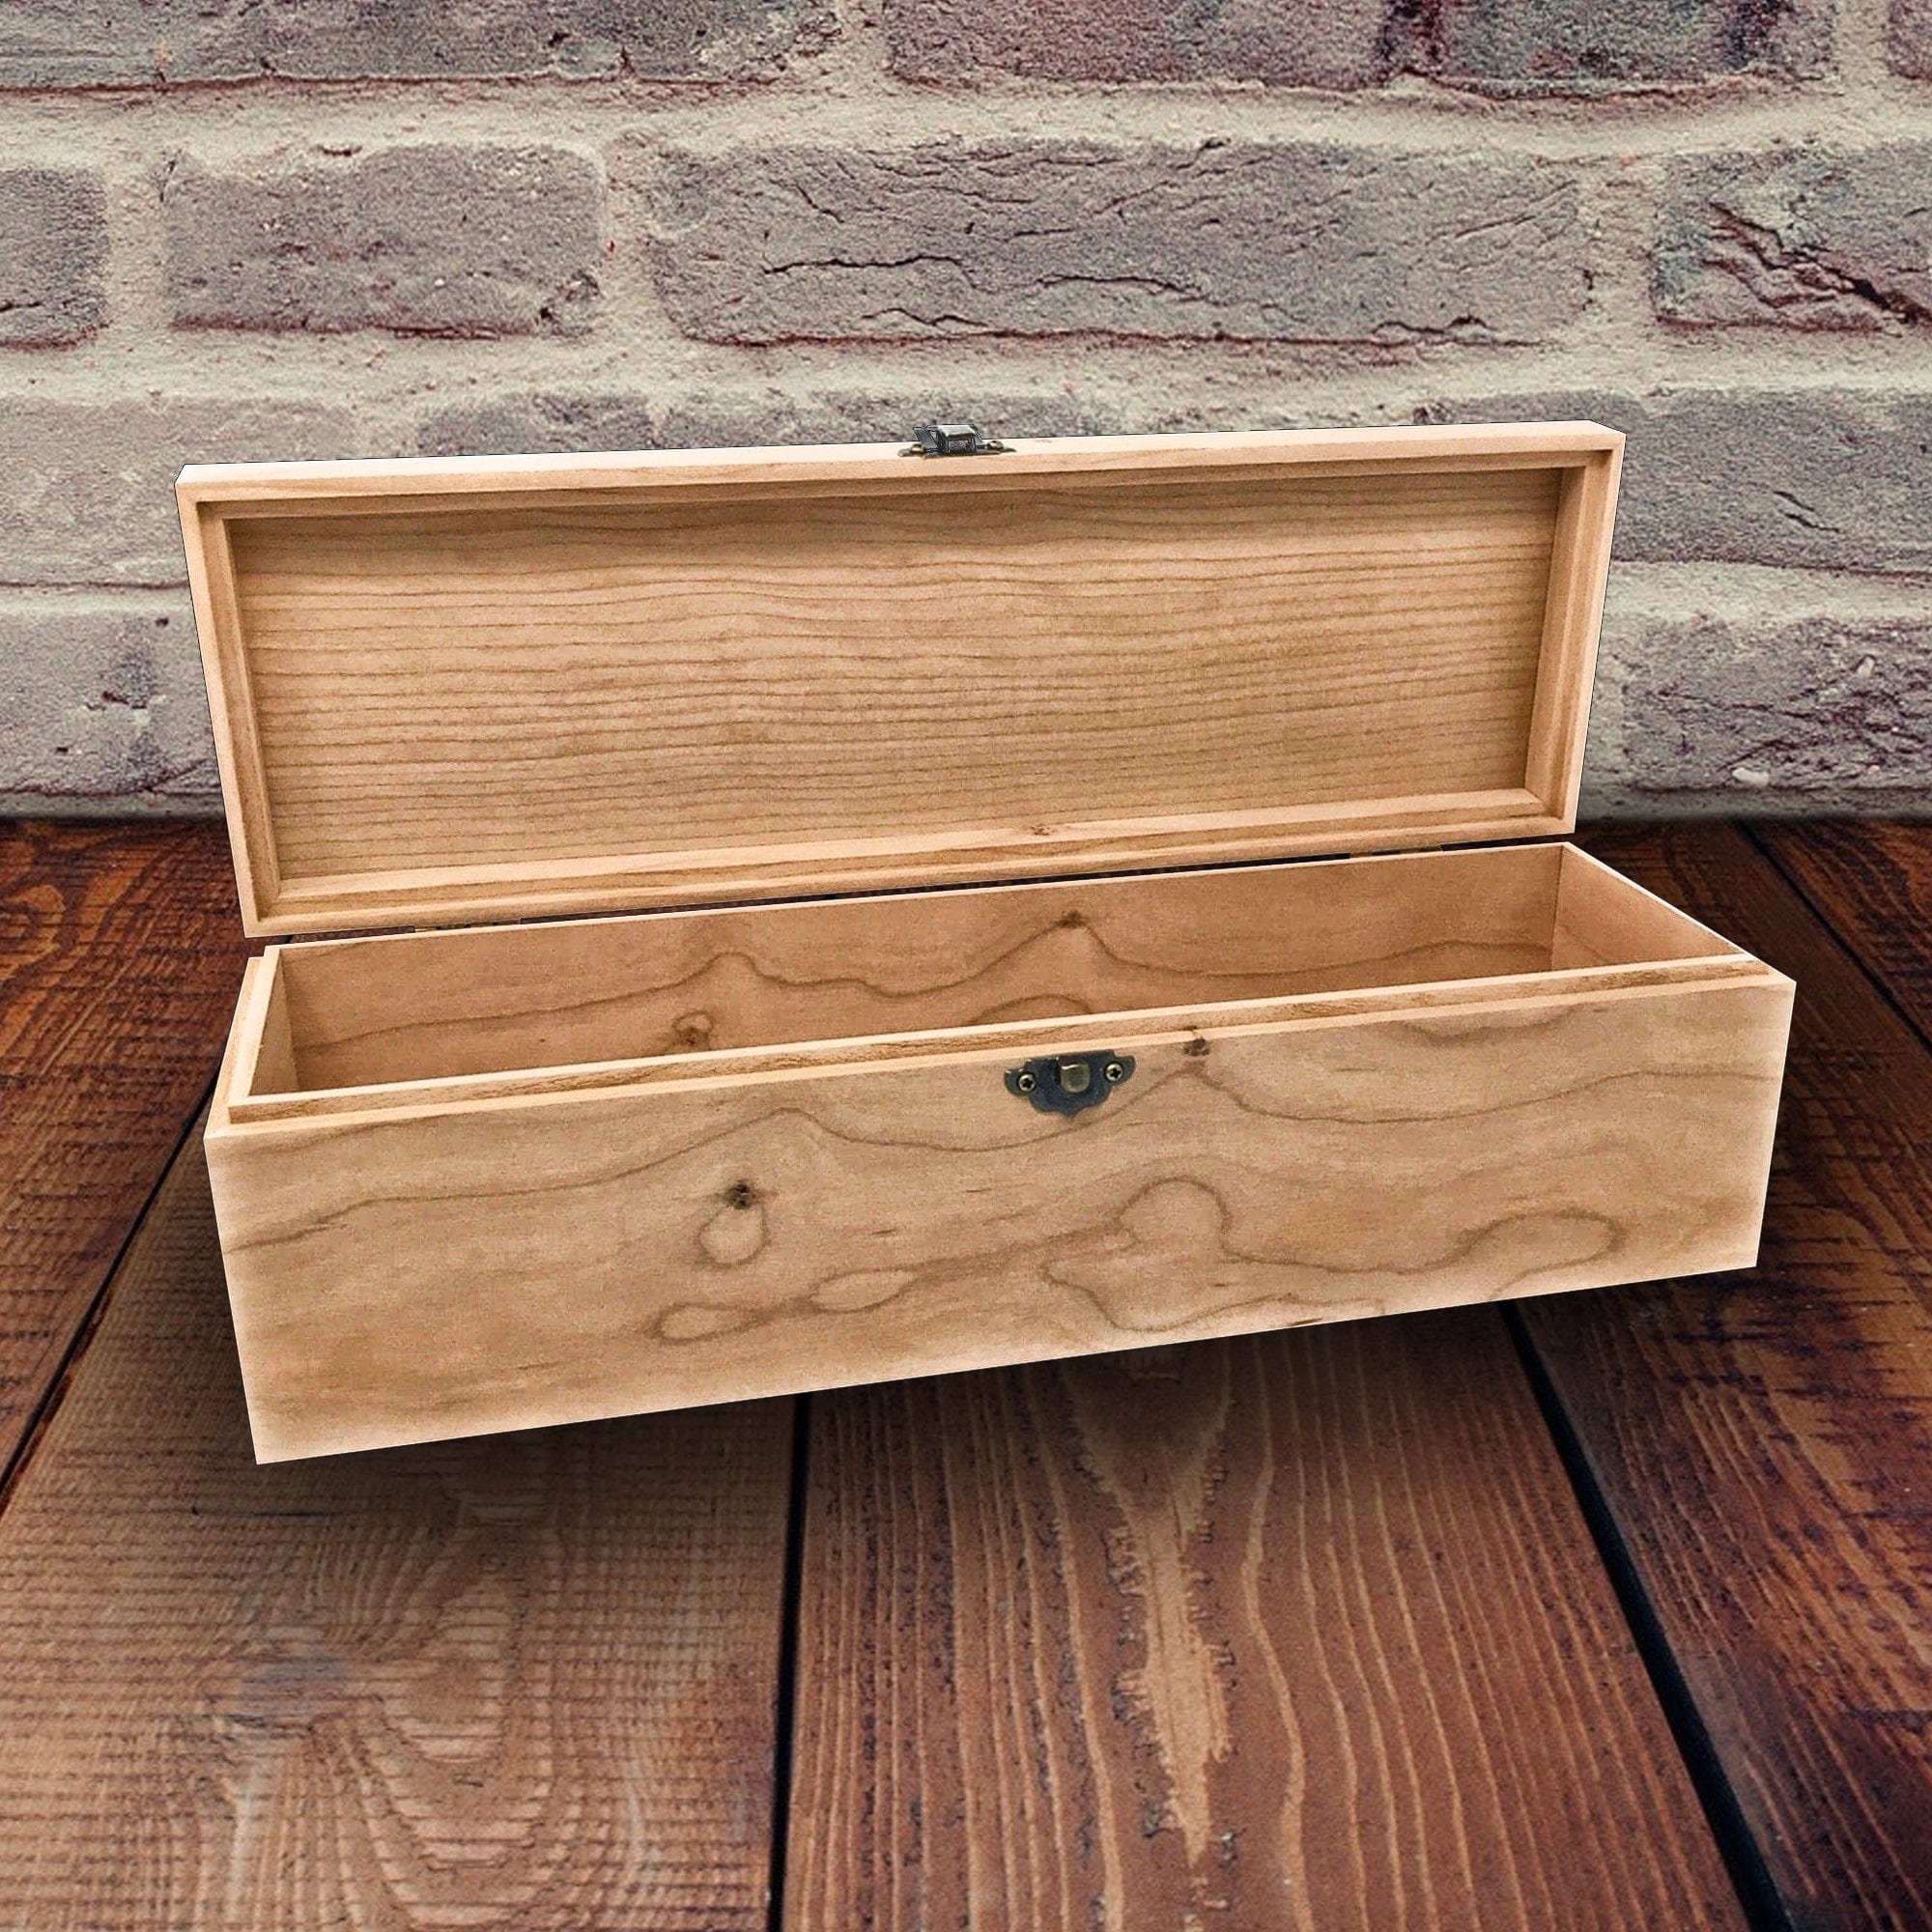 Large Unfinished Wood Box with Hinged Lid 13 3/8 x 10 1/4 x 4 3/4  Personalized Laser Engraving Available